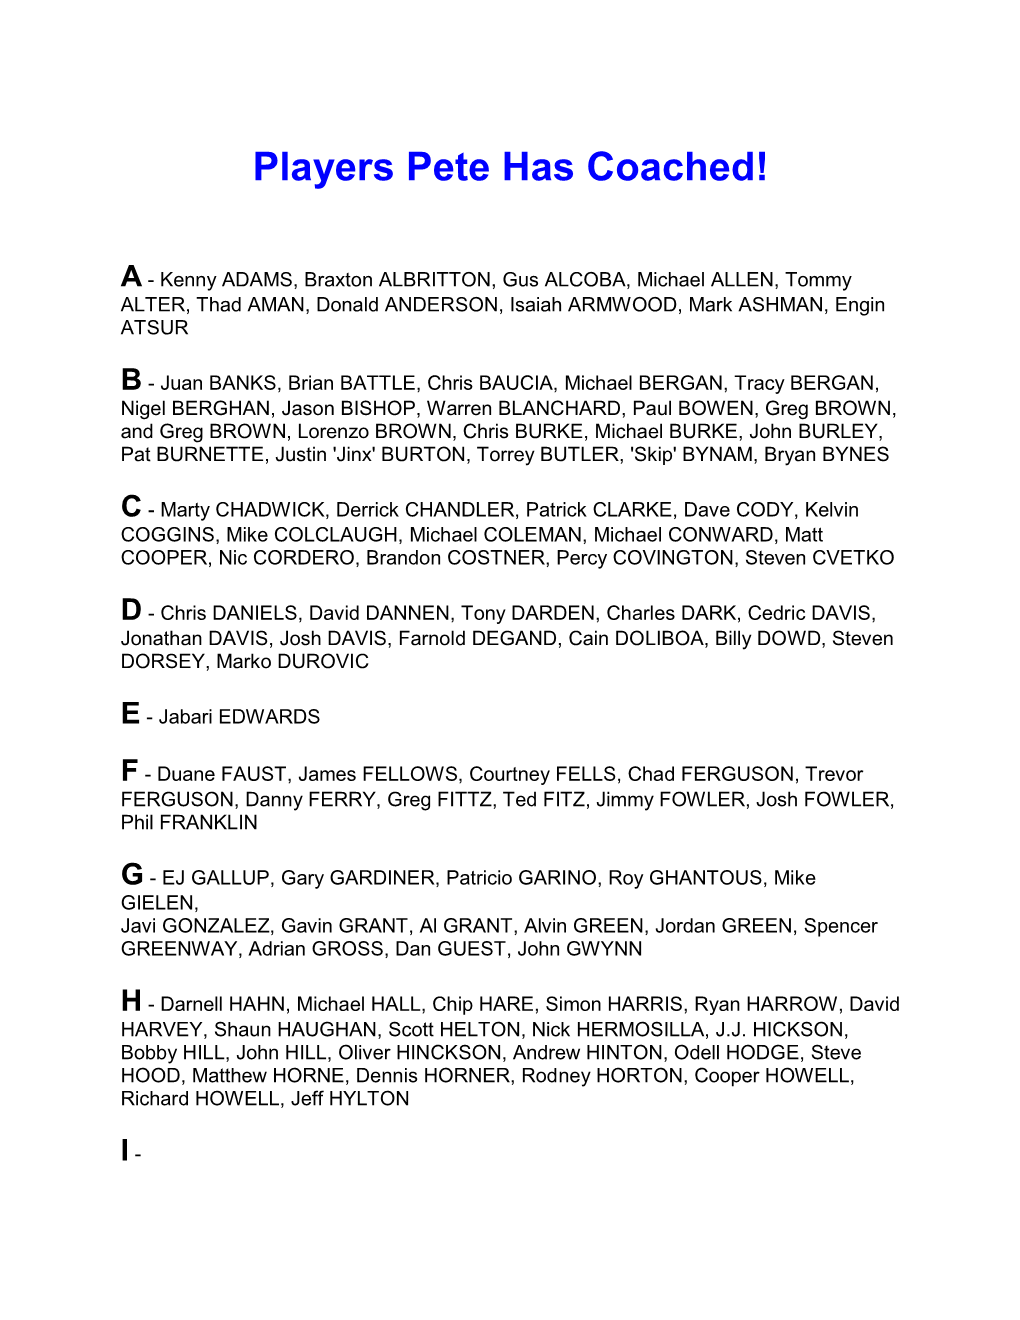 Players Pete's Coached